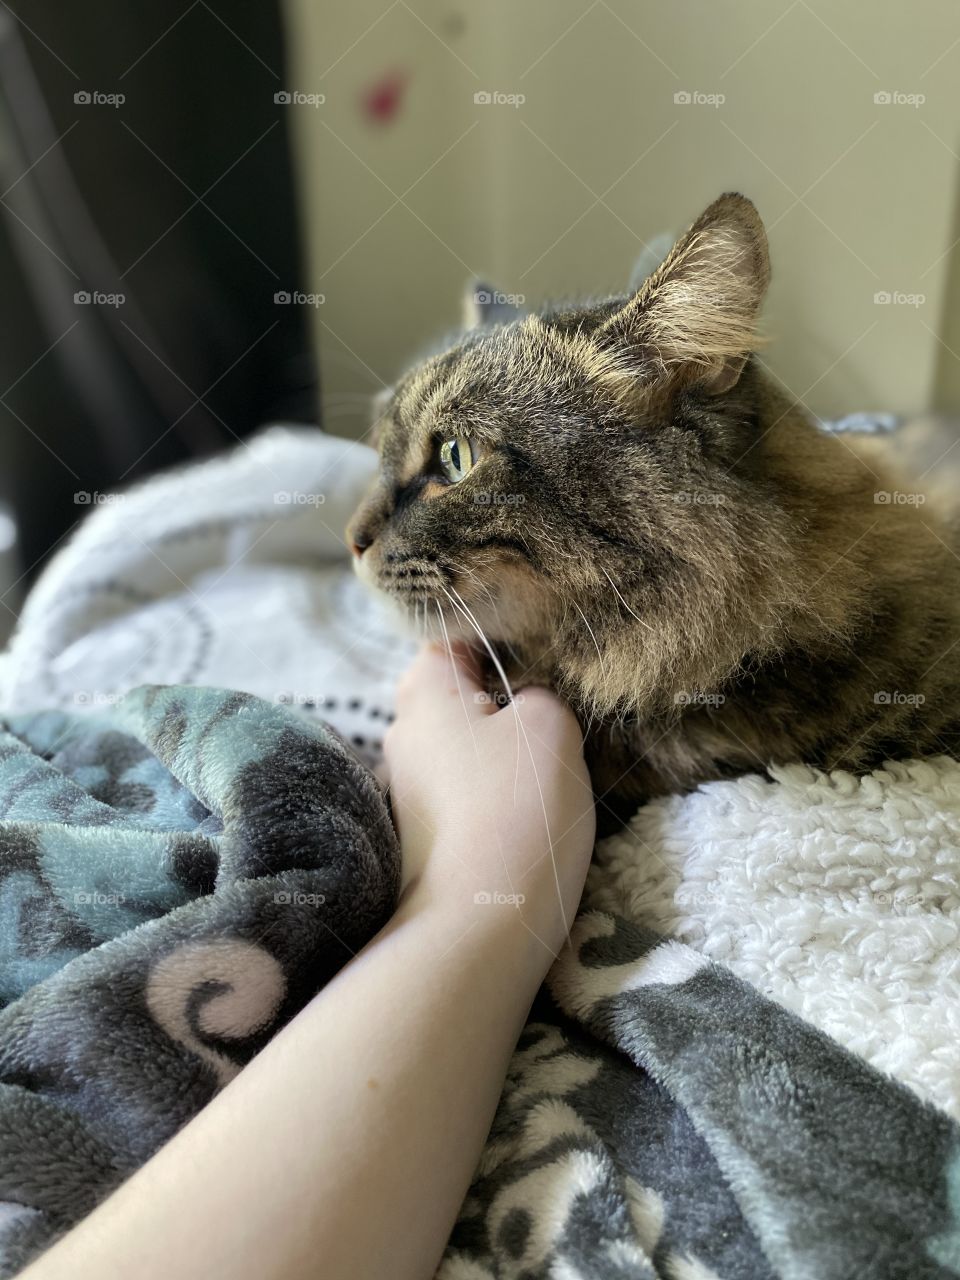 Another fluffy cat enjoying some loving pets! Warm and cozy in some blankets, in some natural lighting!